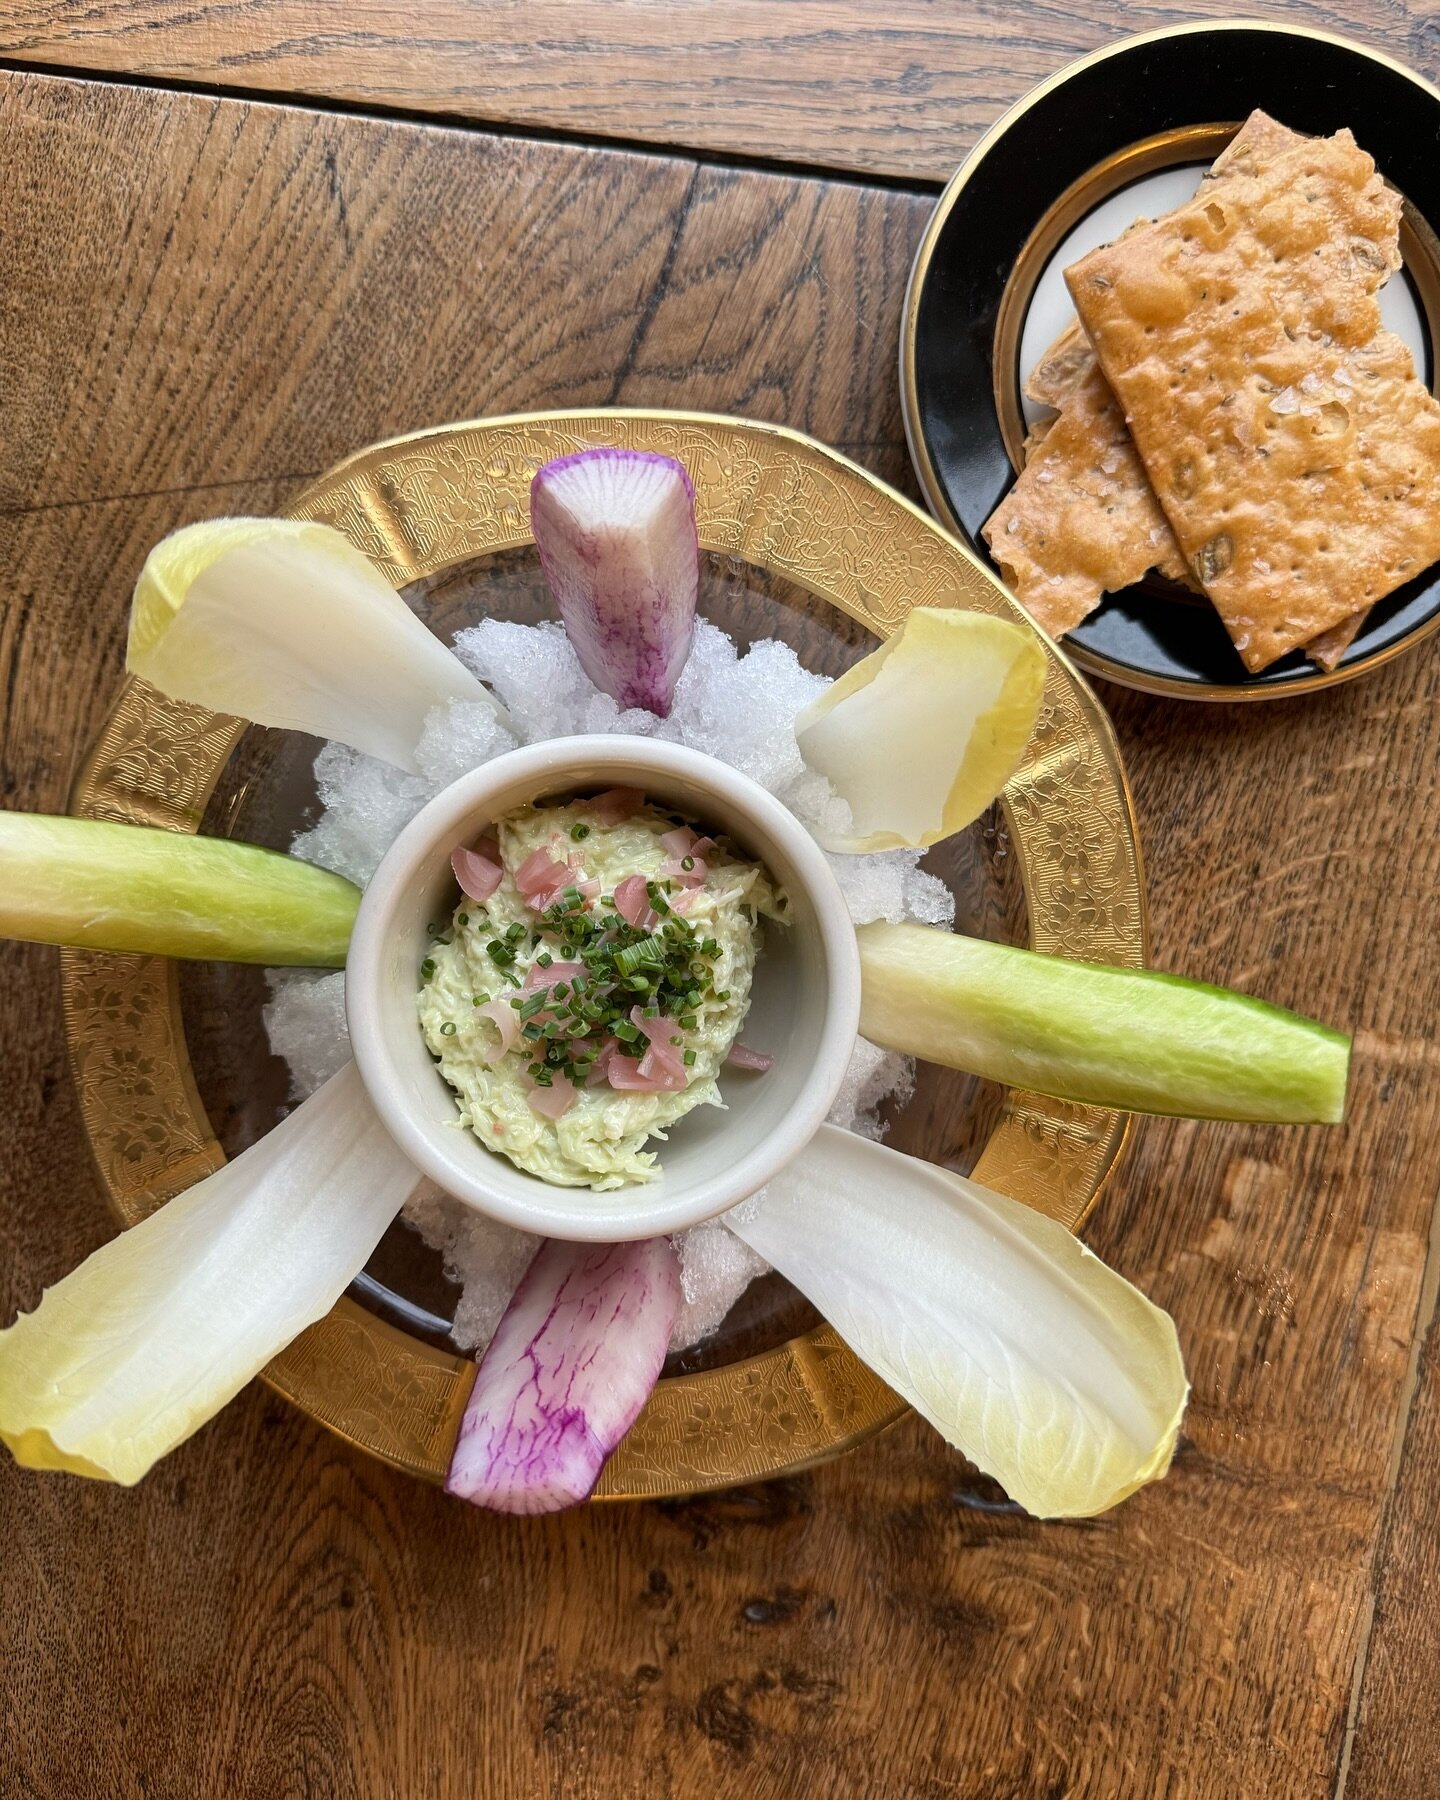 Maine peekytoe crab salad with pickled ramps and dill aioli. Served with fresh winter vegetables and @winslowstable birdseed crackers. A refreshing appetizer to kick off your evening at The Bistro. #justsayoui #maineseafood 

#seafood #shellfish #foo